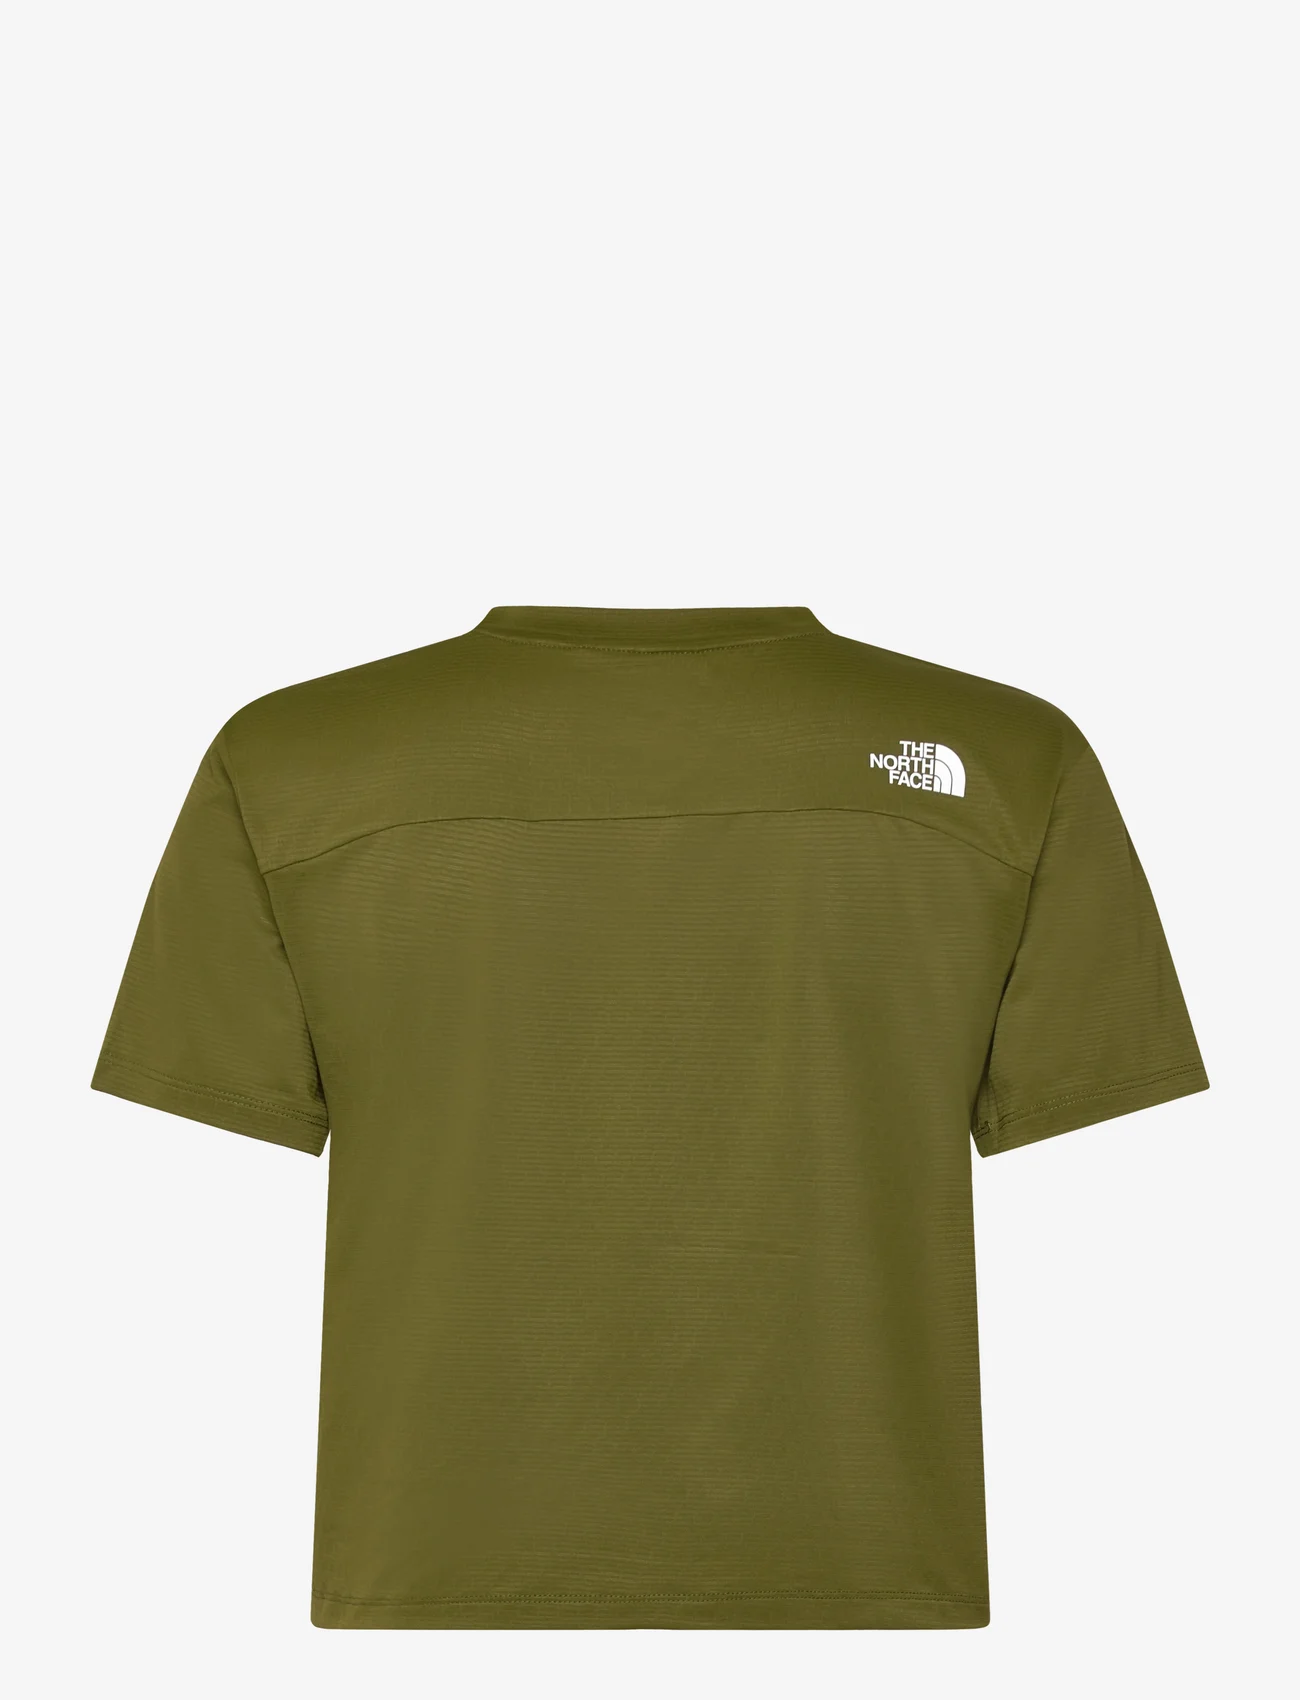 The North Face - W FLEX CIRCUIT S/S TEE - t-skjorter - forest olive - 1